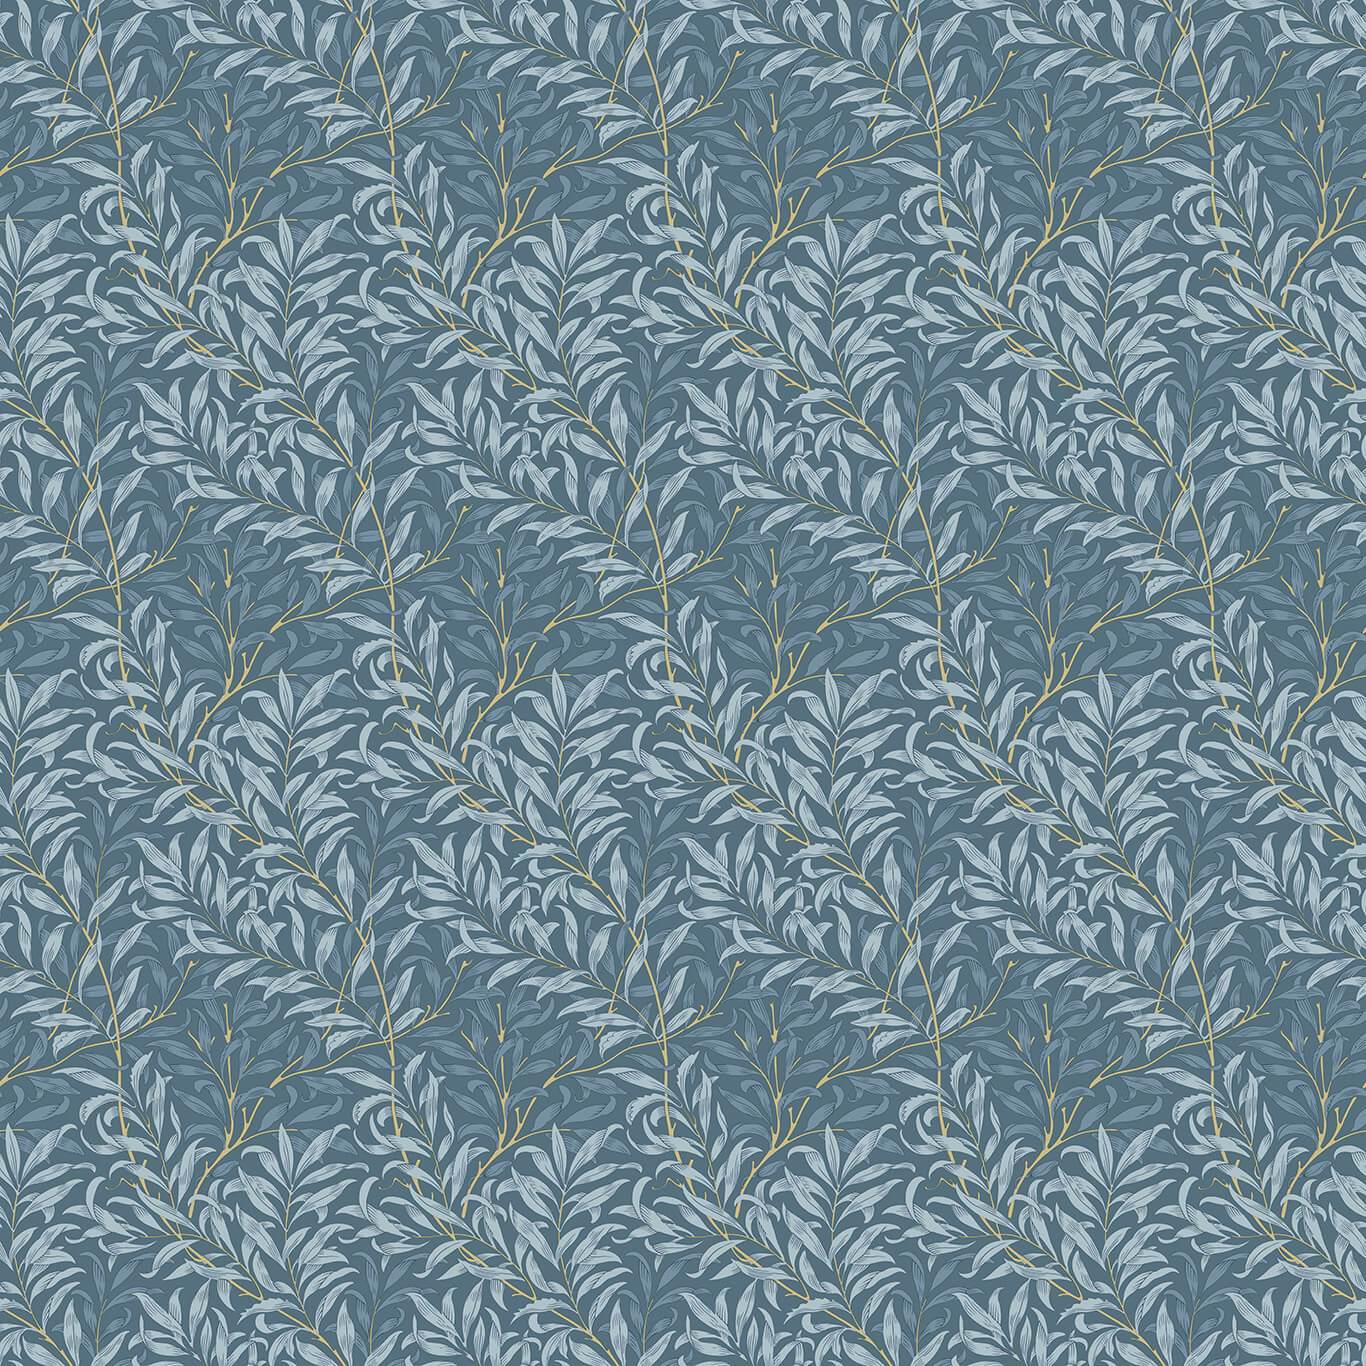 Willow Boughs Denim Fabric by CNC